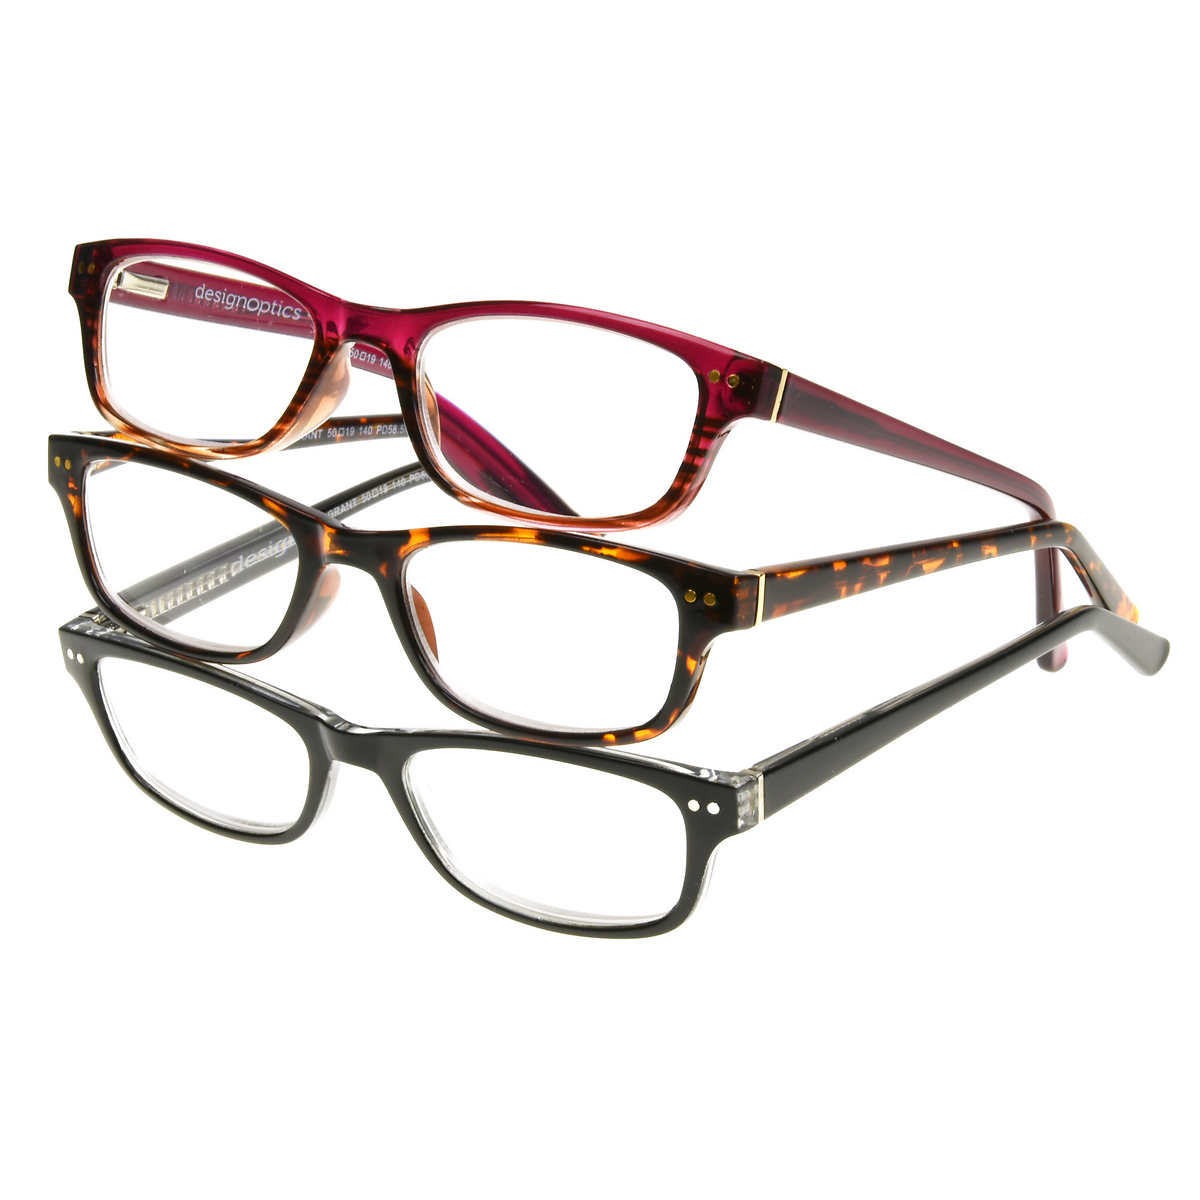 What types of frames does Costco Optical sell?